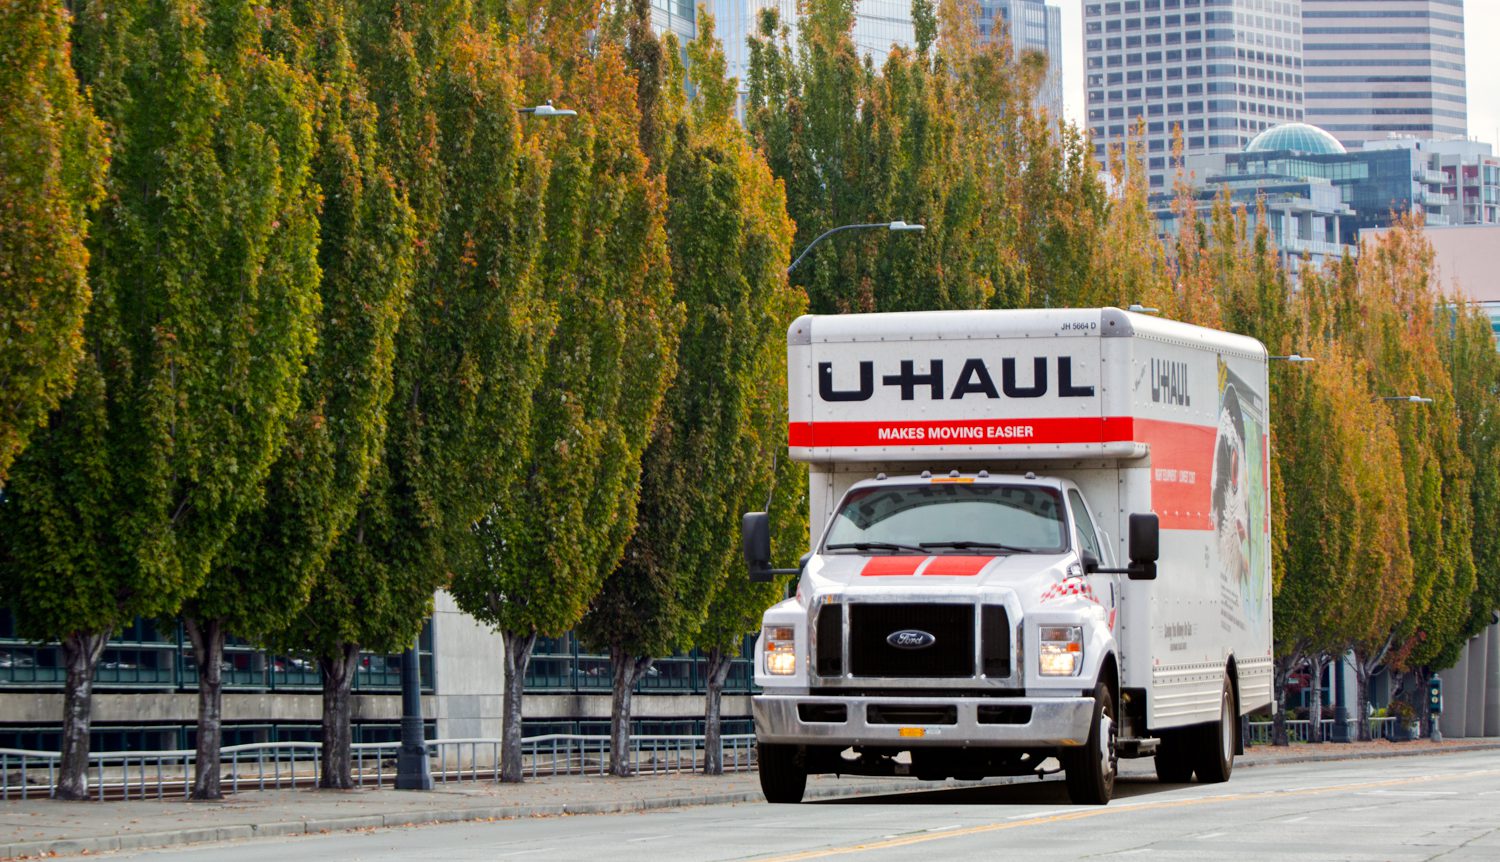 U-Haul Growth States of 2022: Texas, Florida Remain Top Destinations for One-Way Moves